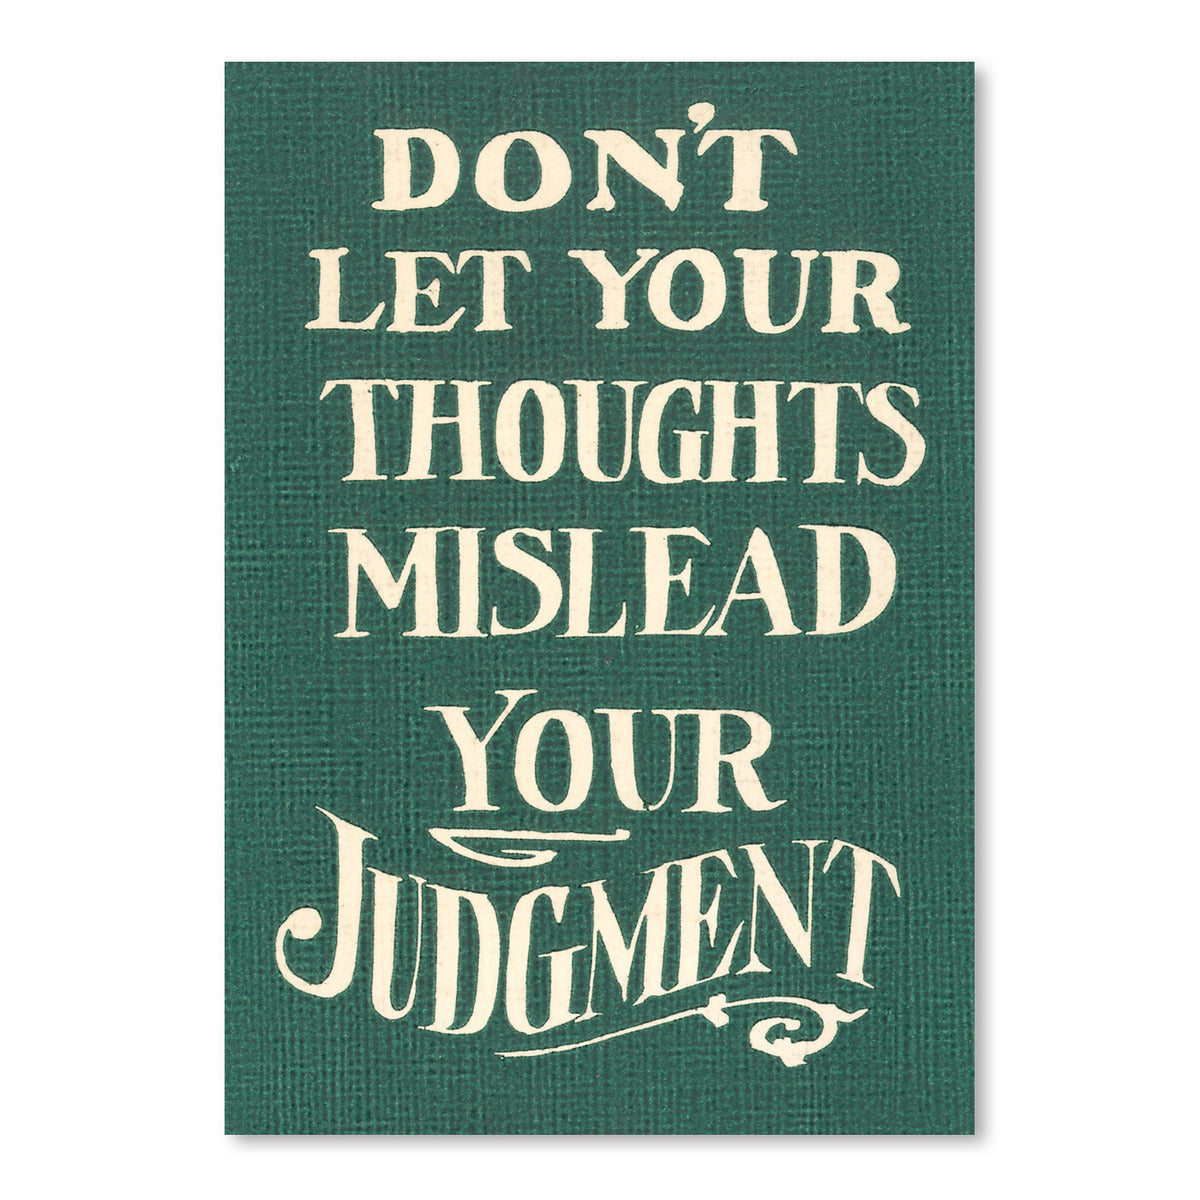 Use Judgment by Found Image Press Art Print - Art Print - Americanflat